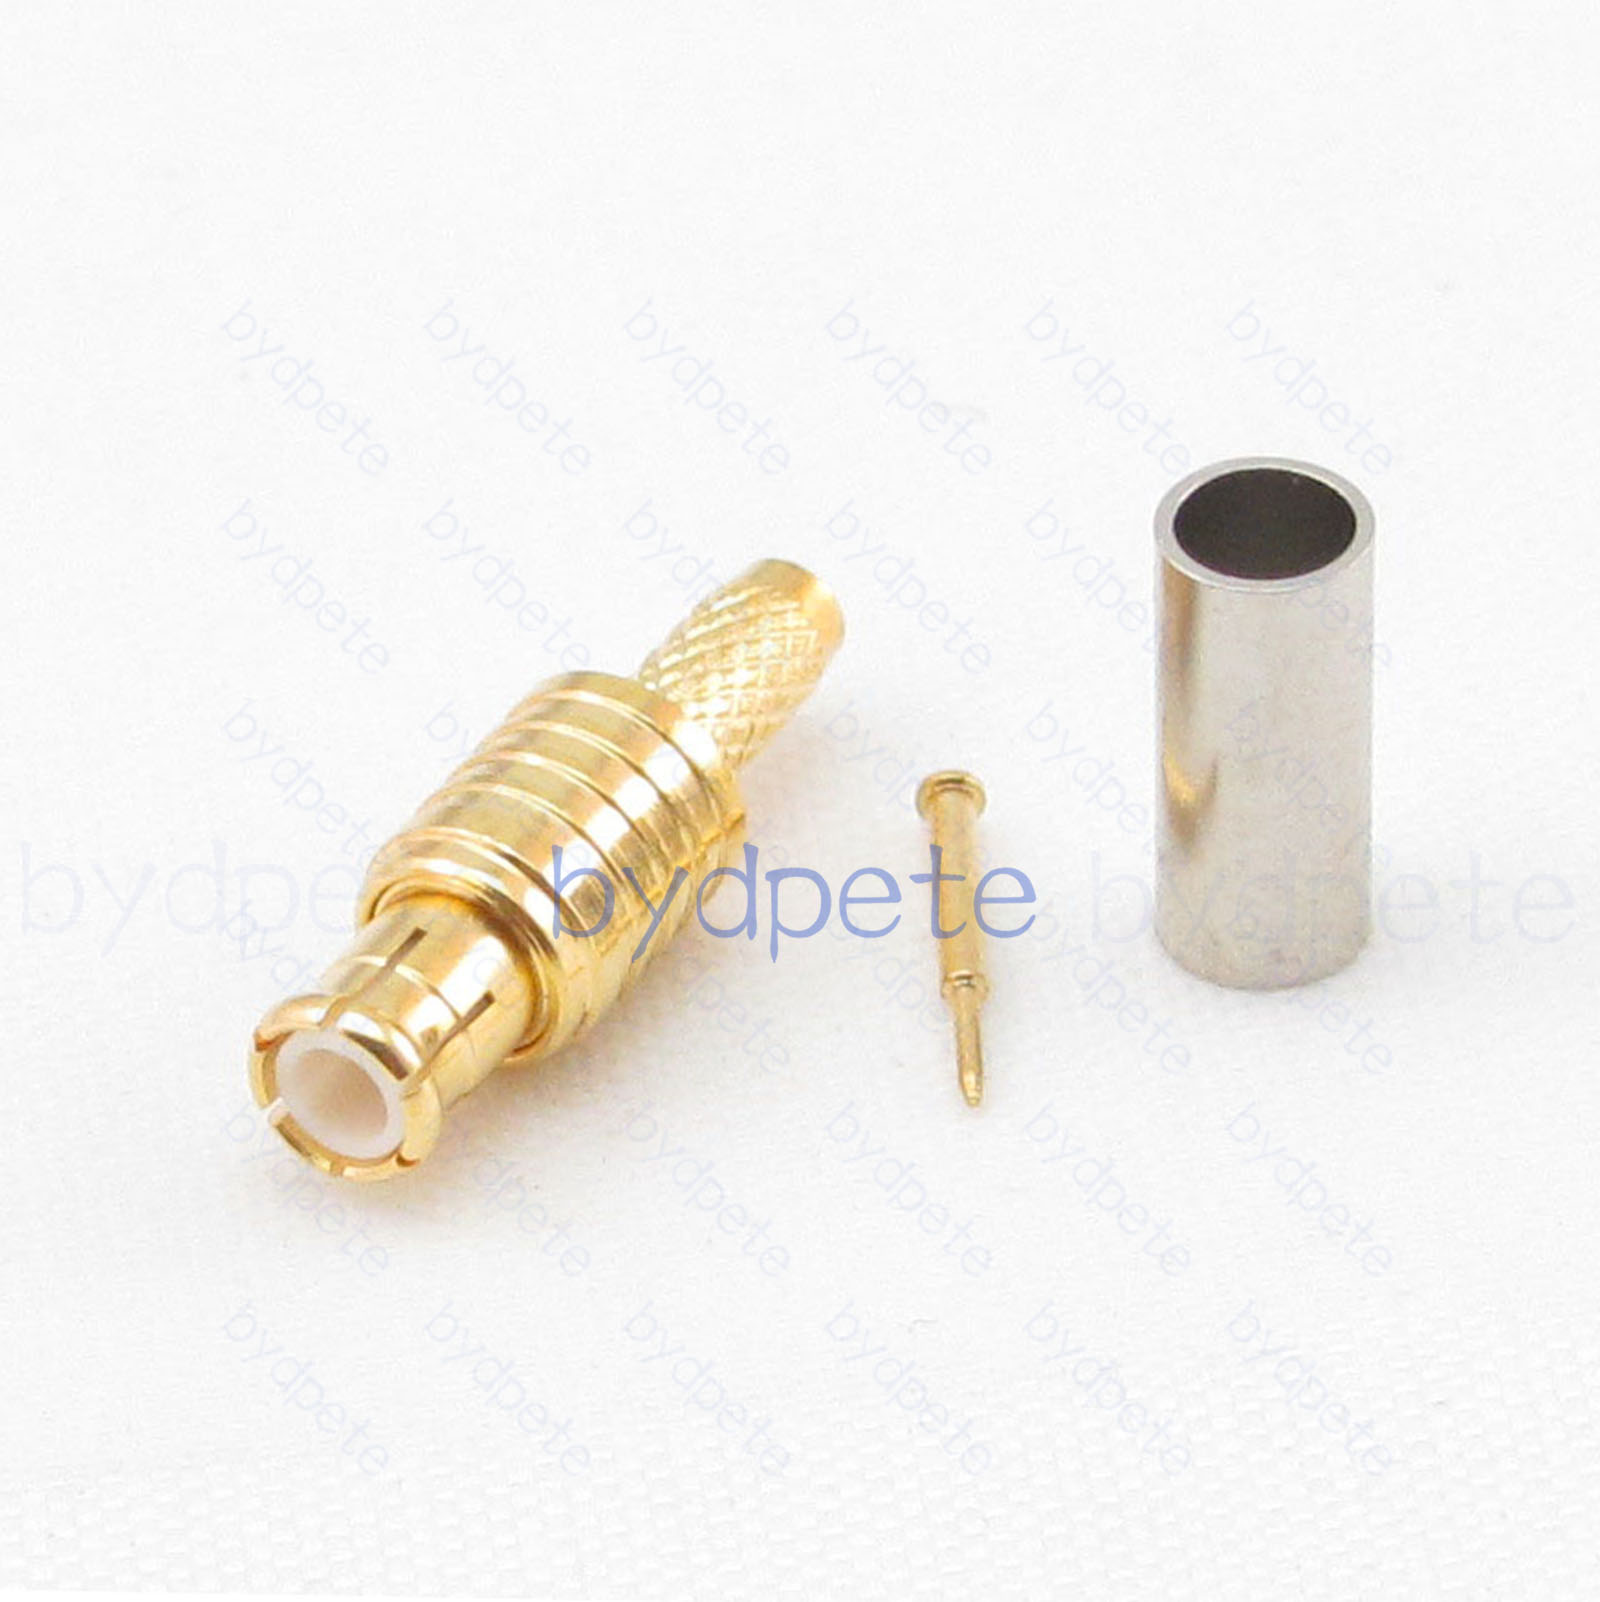 MCX male plug Connector Coaxial crimp for RG316 RG174 RG179 cable 50 ohm Coax bydpete